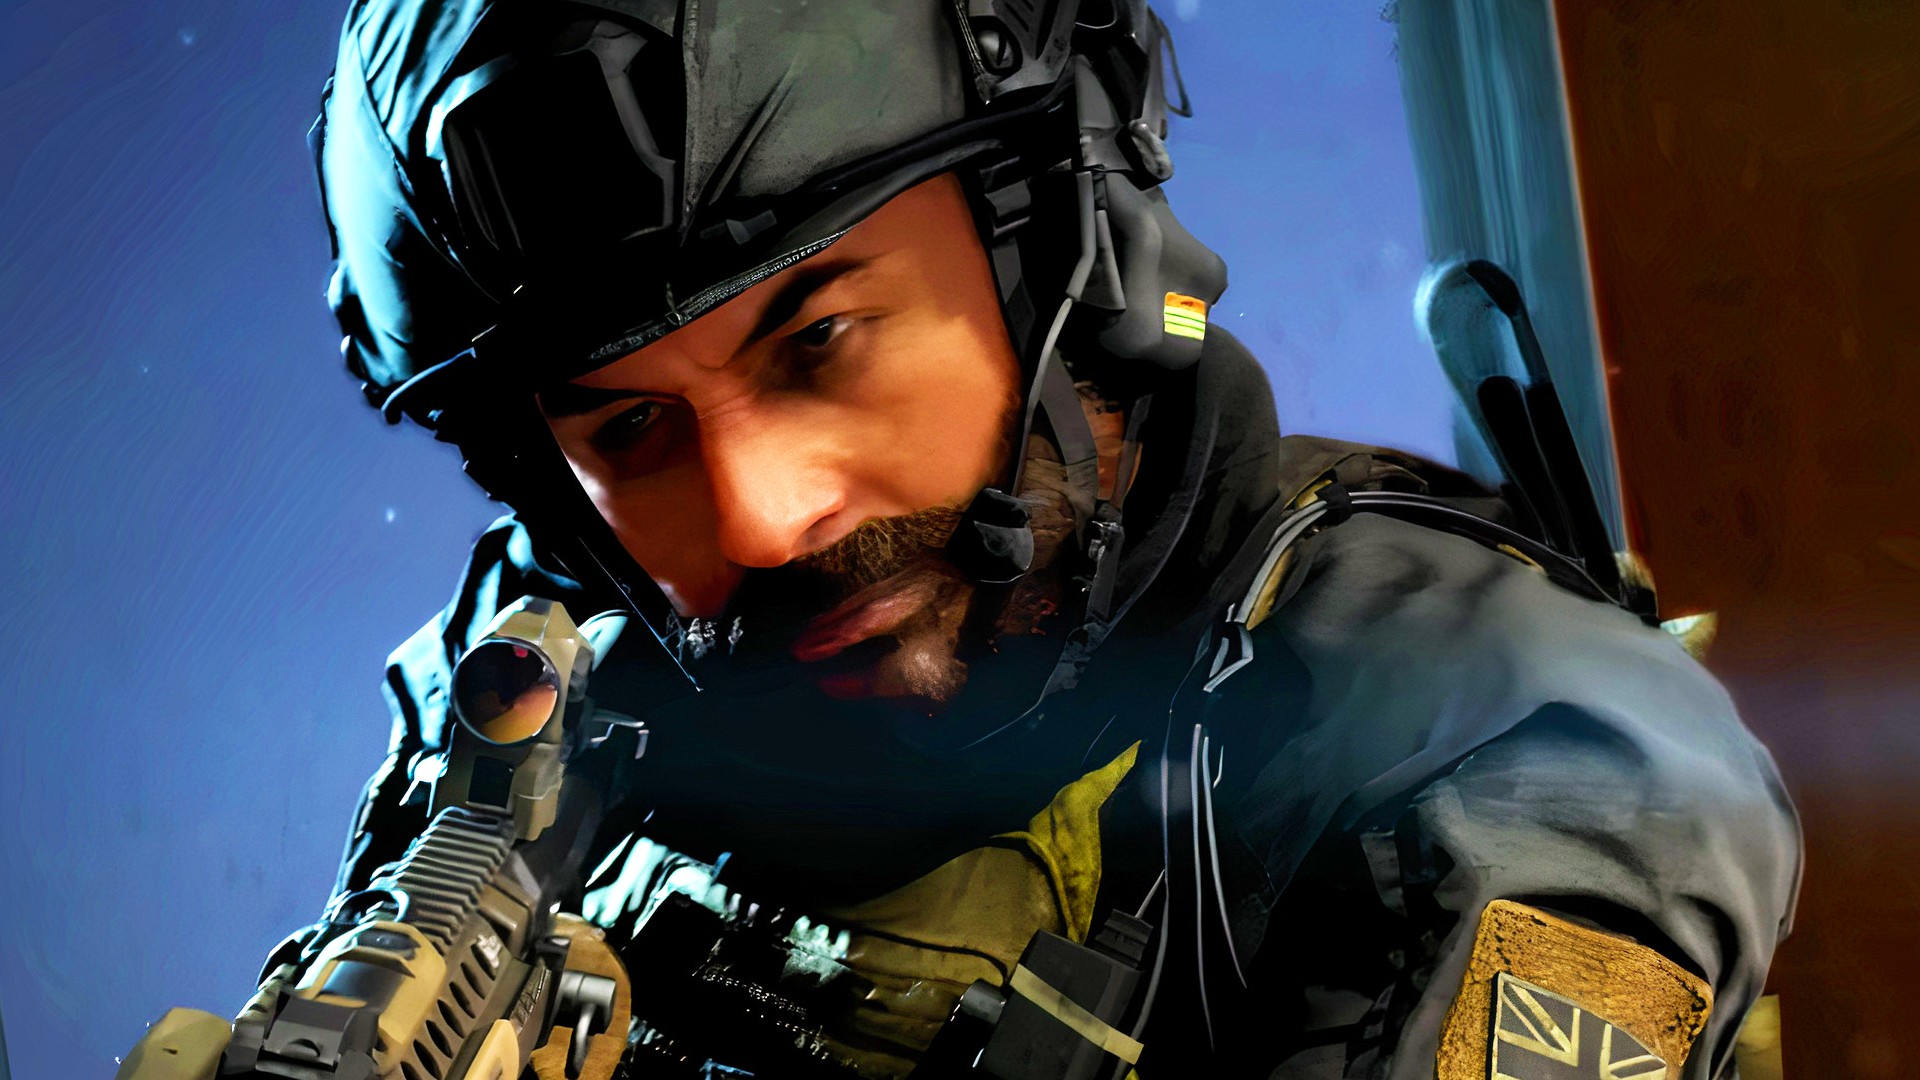 Call of Duty: Modern Warfare 2 – Release date, price, trailer and more